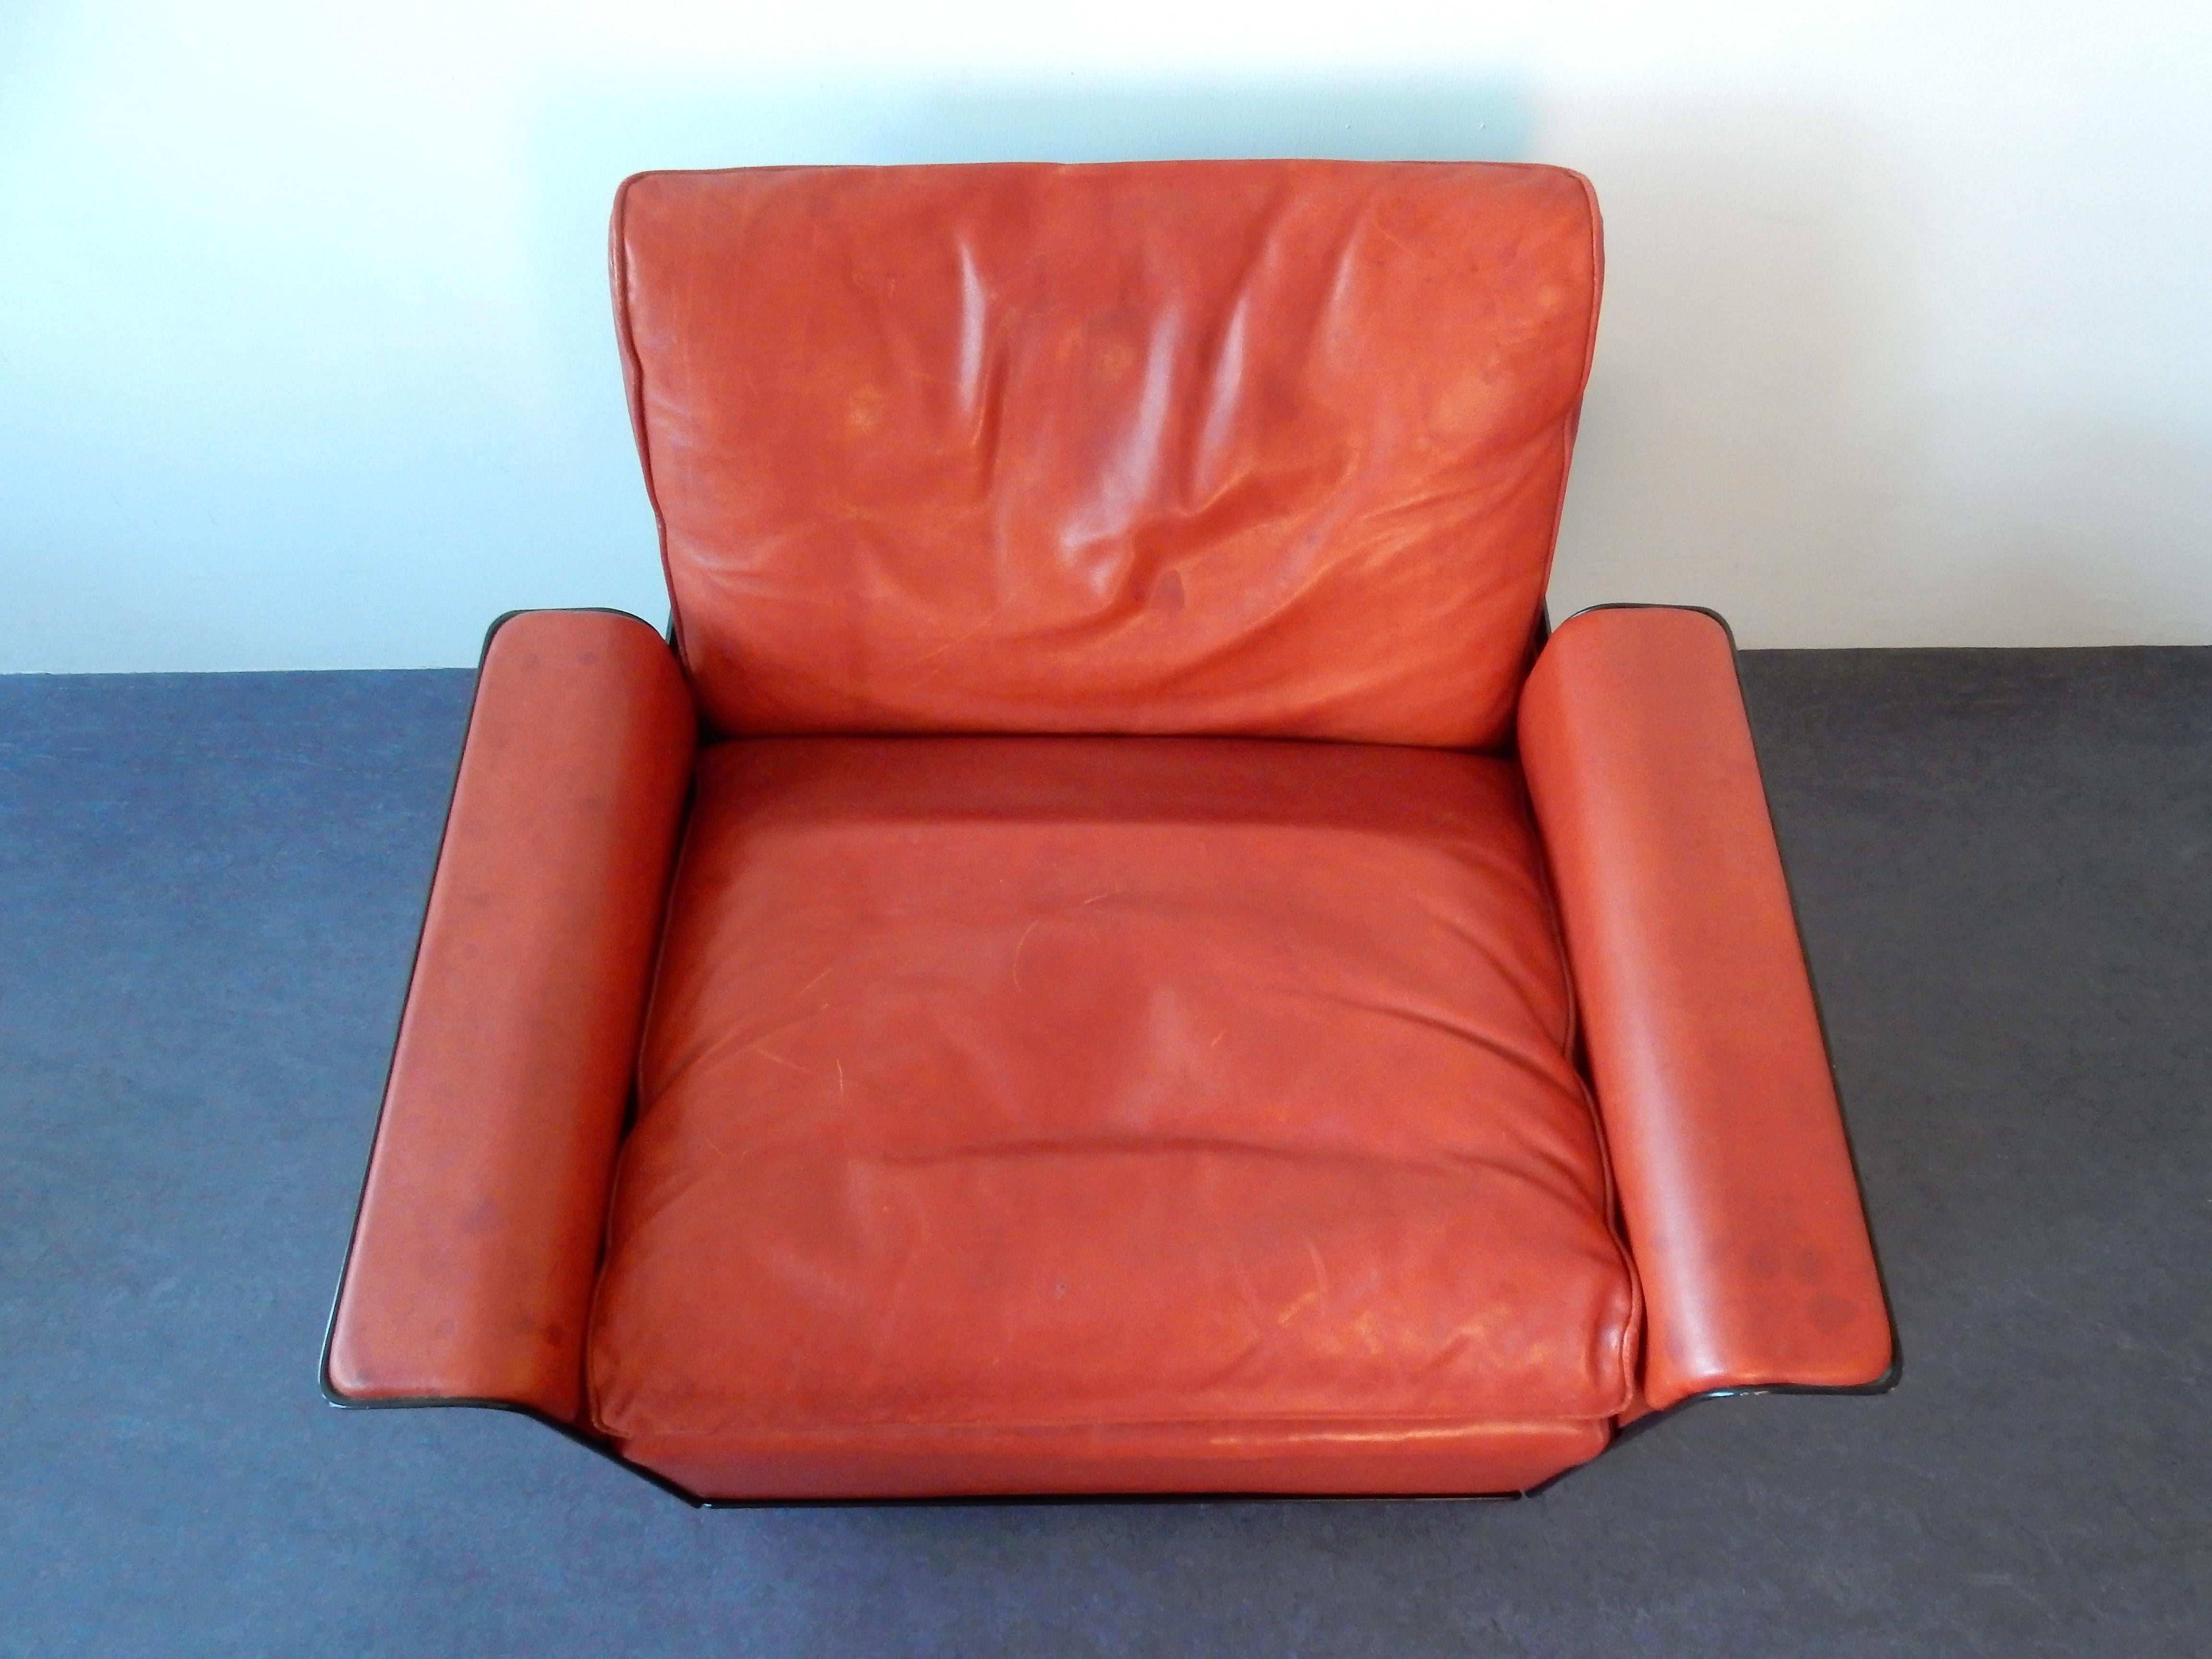 Very nice lounge chair designed by Dieter Rams for Vitsoe in 1962. This chair is of the famous 620 series. The cushions are covered with very soft high quality red/brown leather, the scales are made of metal with a polyester coating. The chairs can